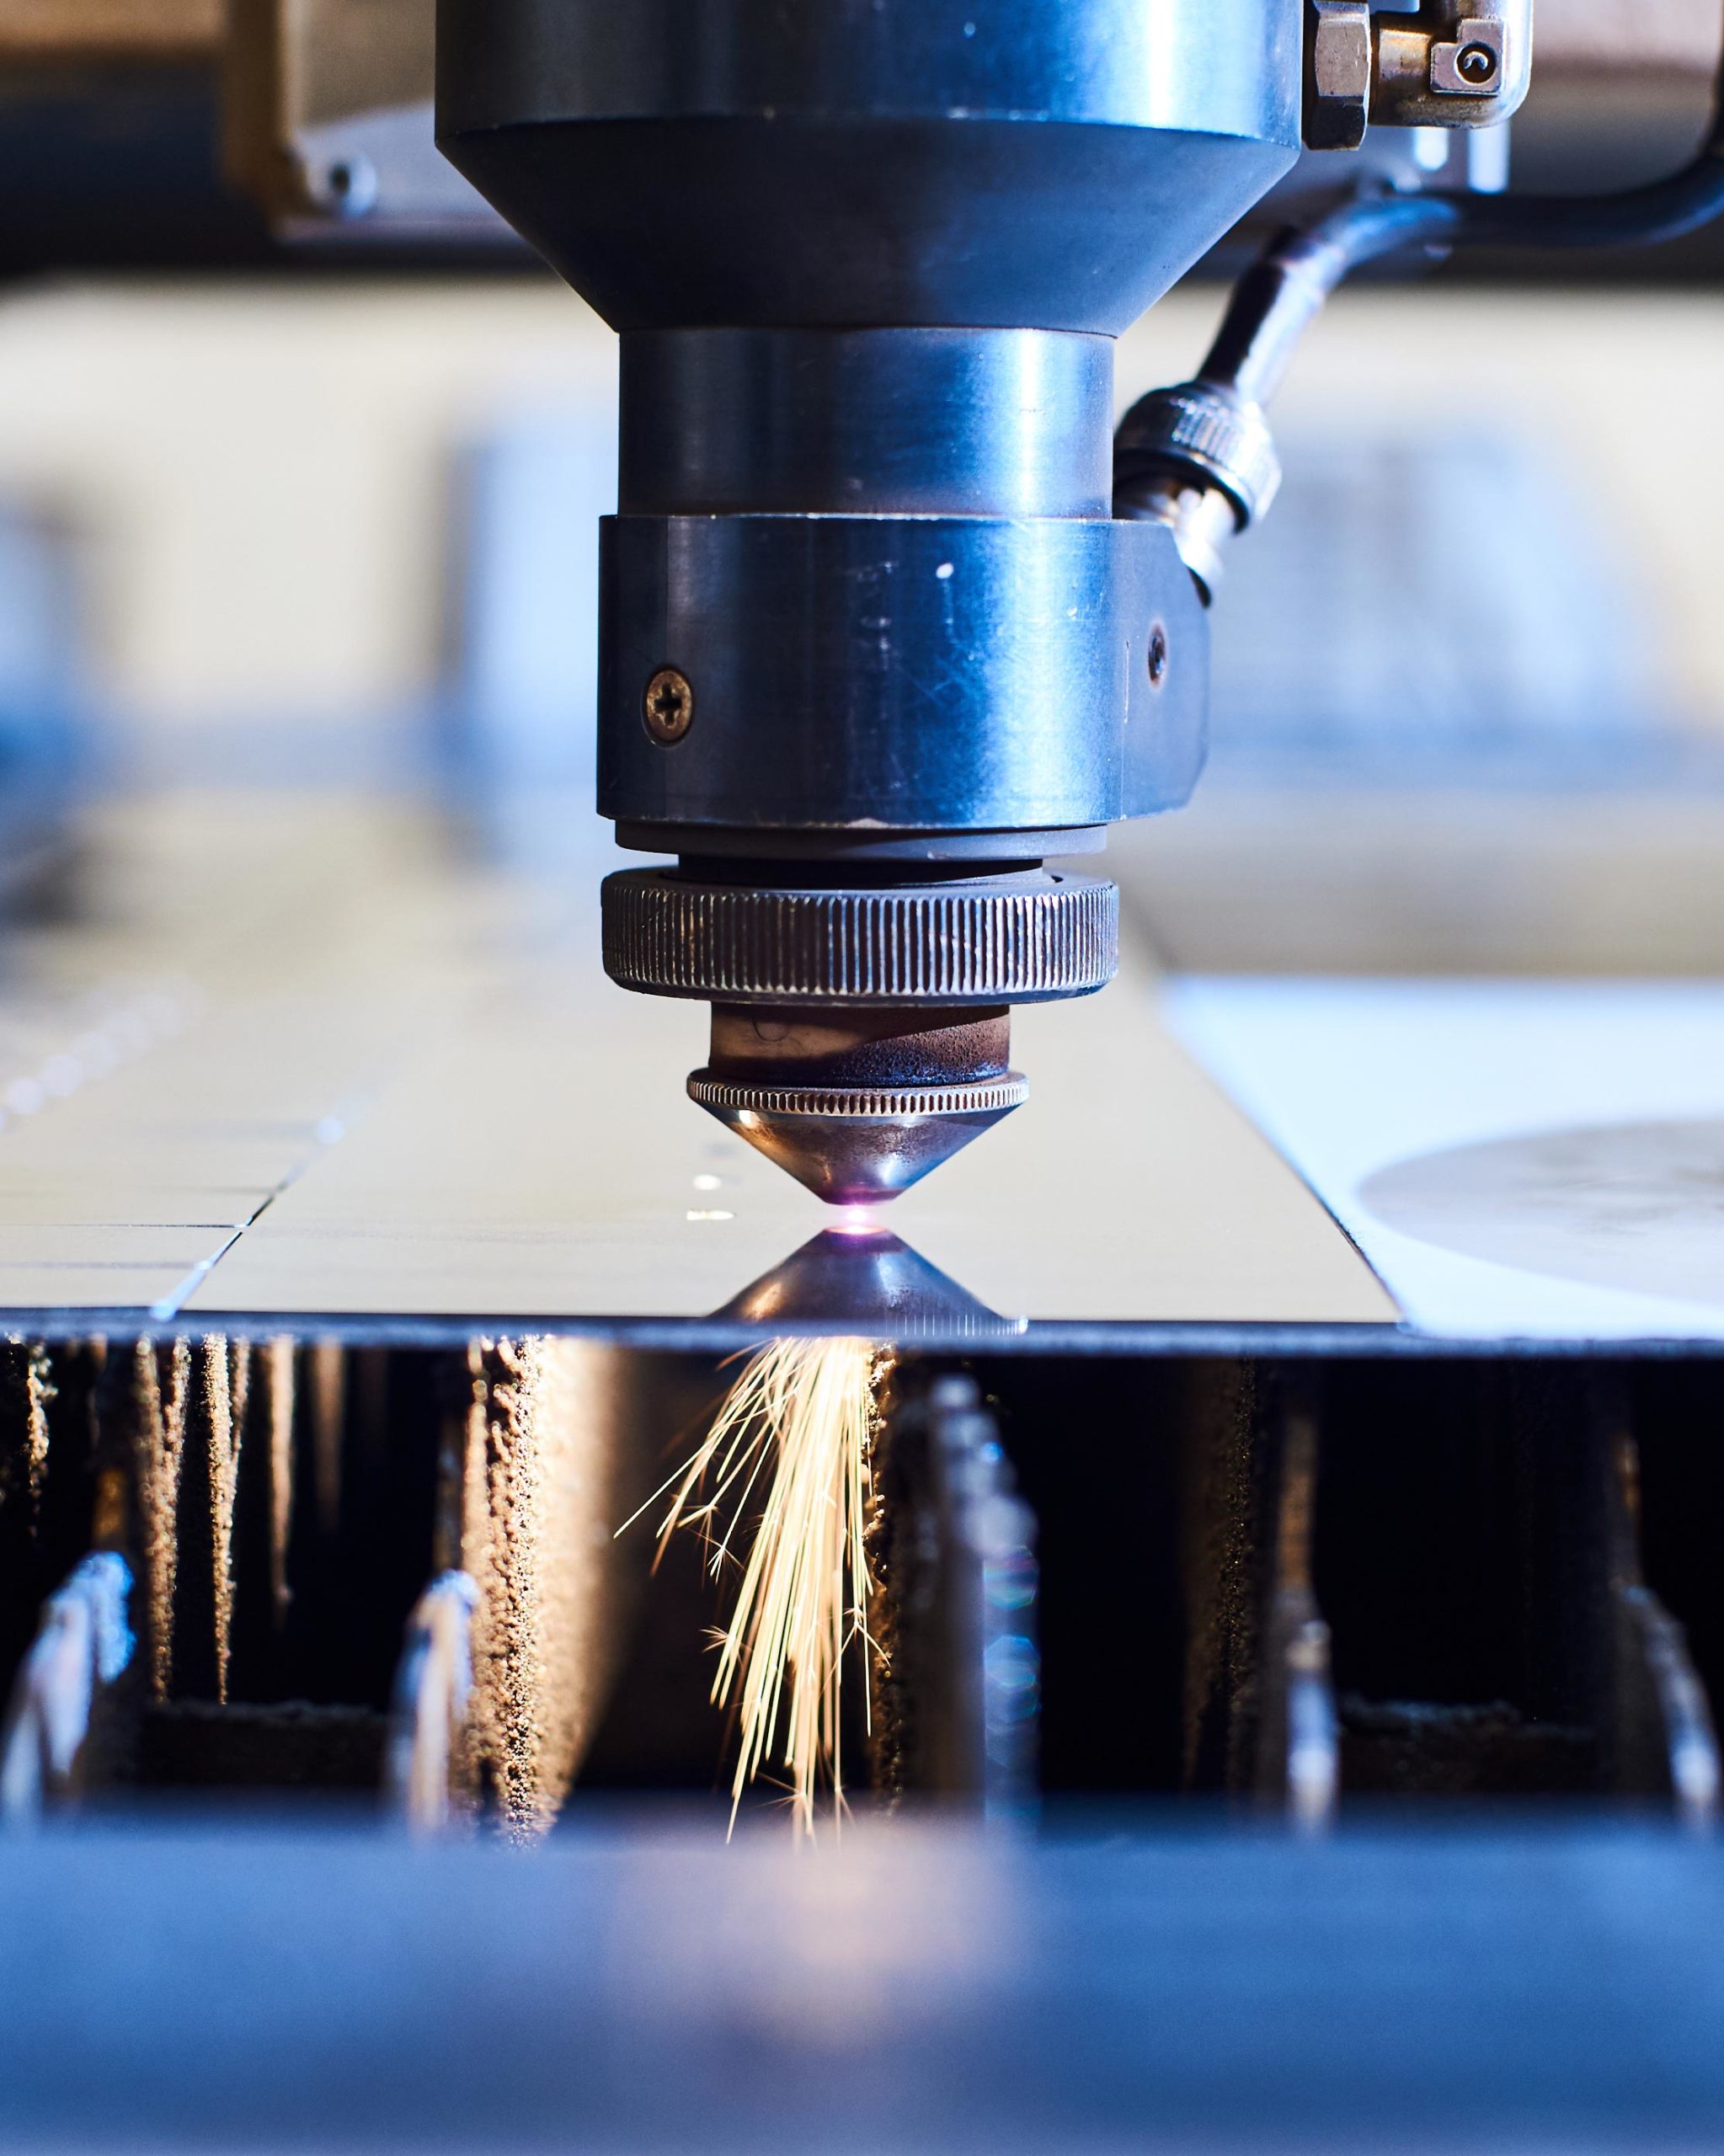 Fiber Laser vs. CO2 Laser Cutting: Which is Better?